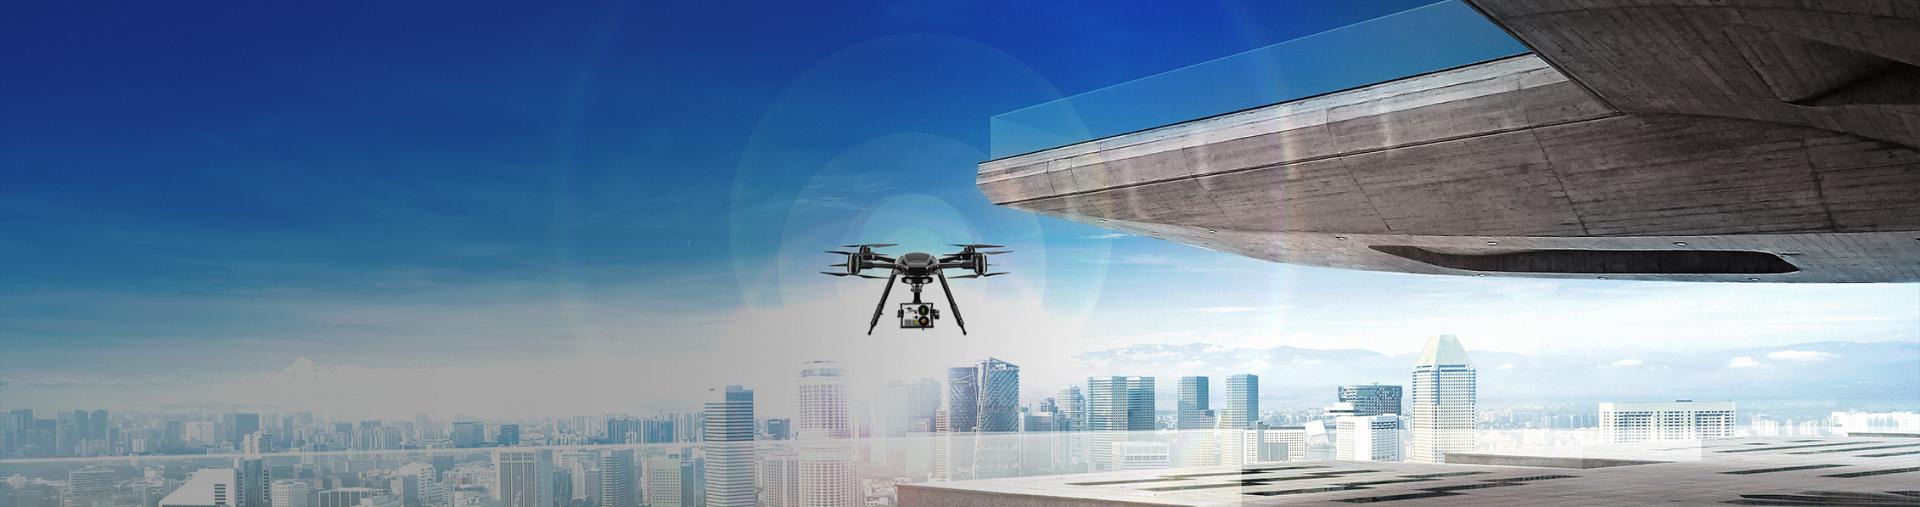 Drone seen from the front flying over a tall building and the city in the background with sun and strong light in the background.